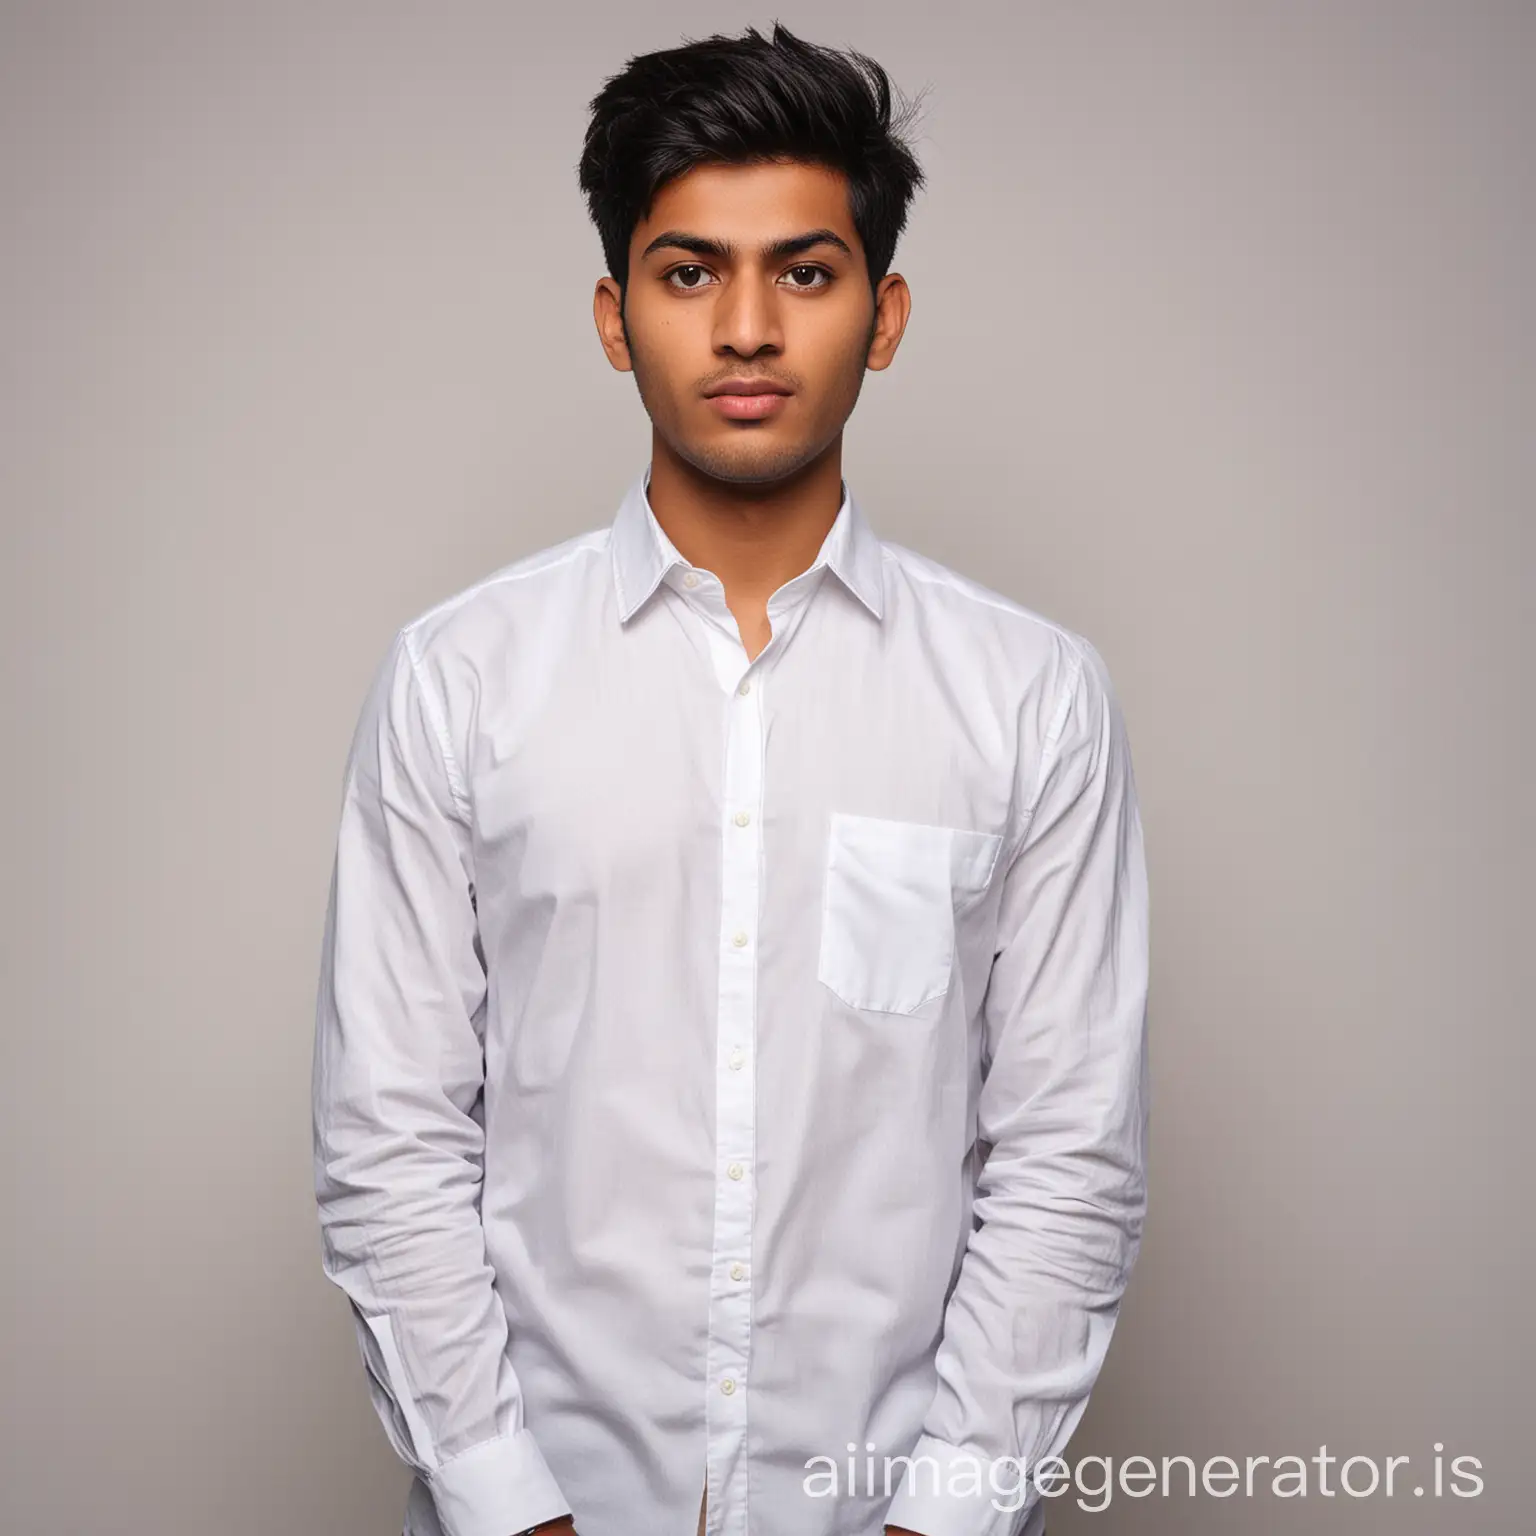 Handsome south Asian man, wearing white long sleeve shirt, posing for a passport photo.  Head straight looking at the camera. Serious face and 20 years old.